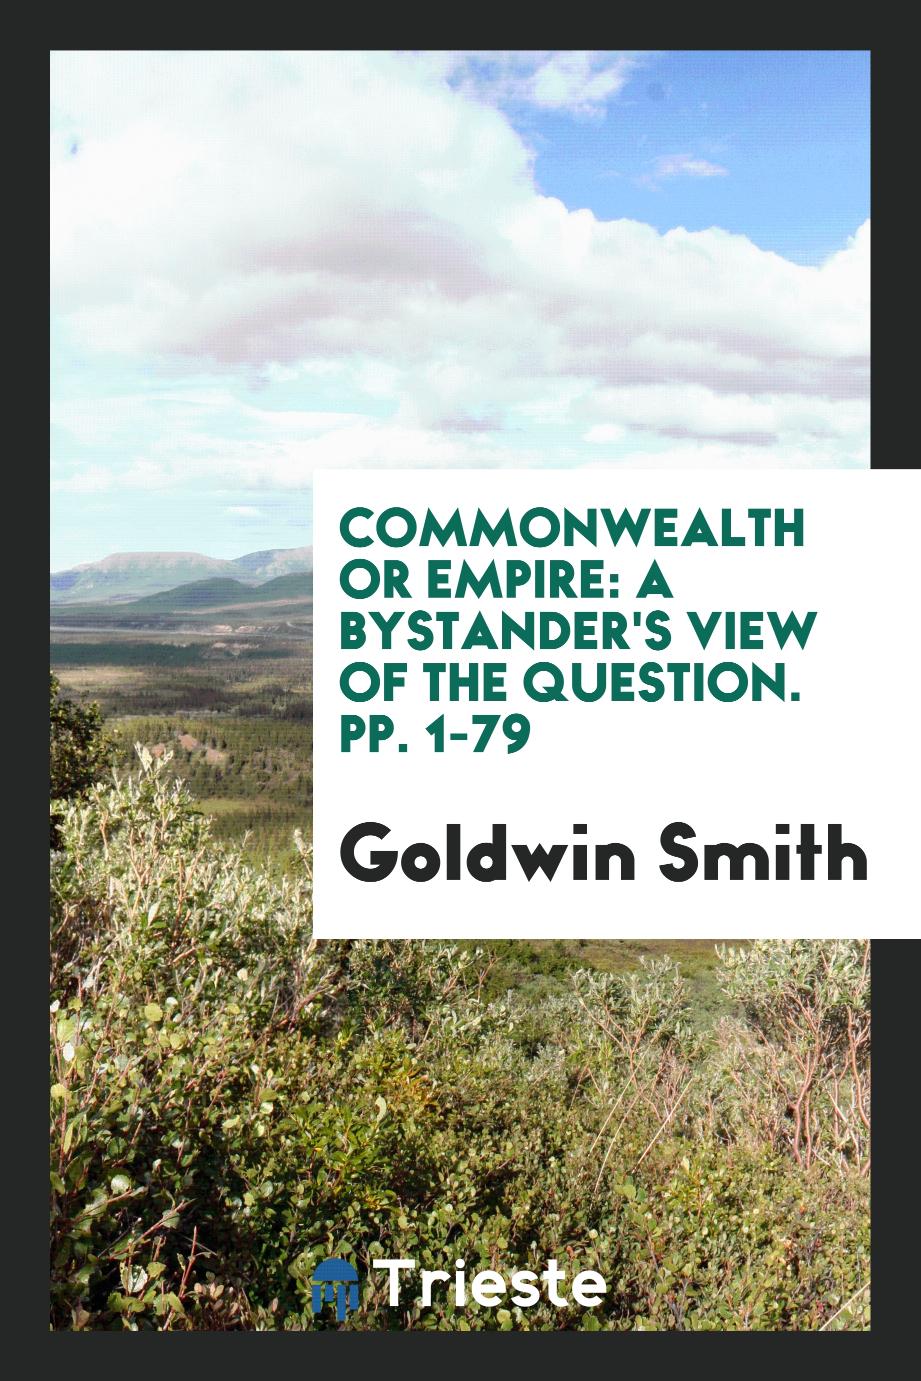 Commonwealth Or Empire: A Bystander's View of the Question. pp. 1-79